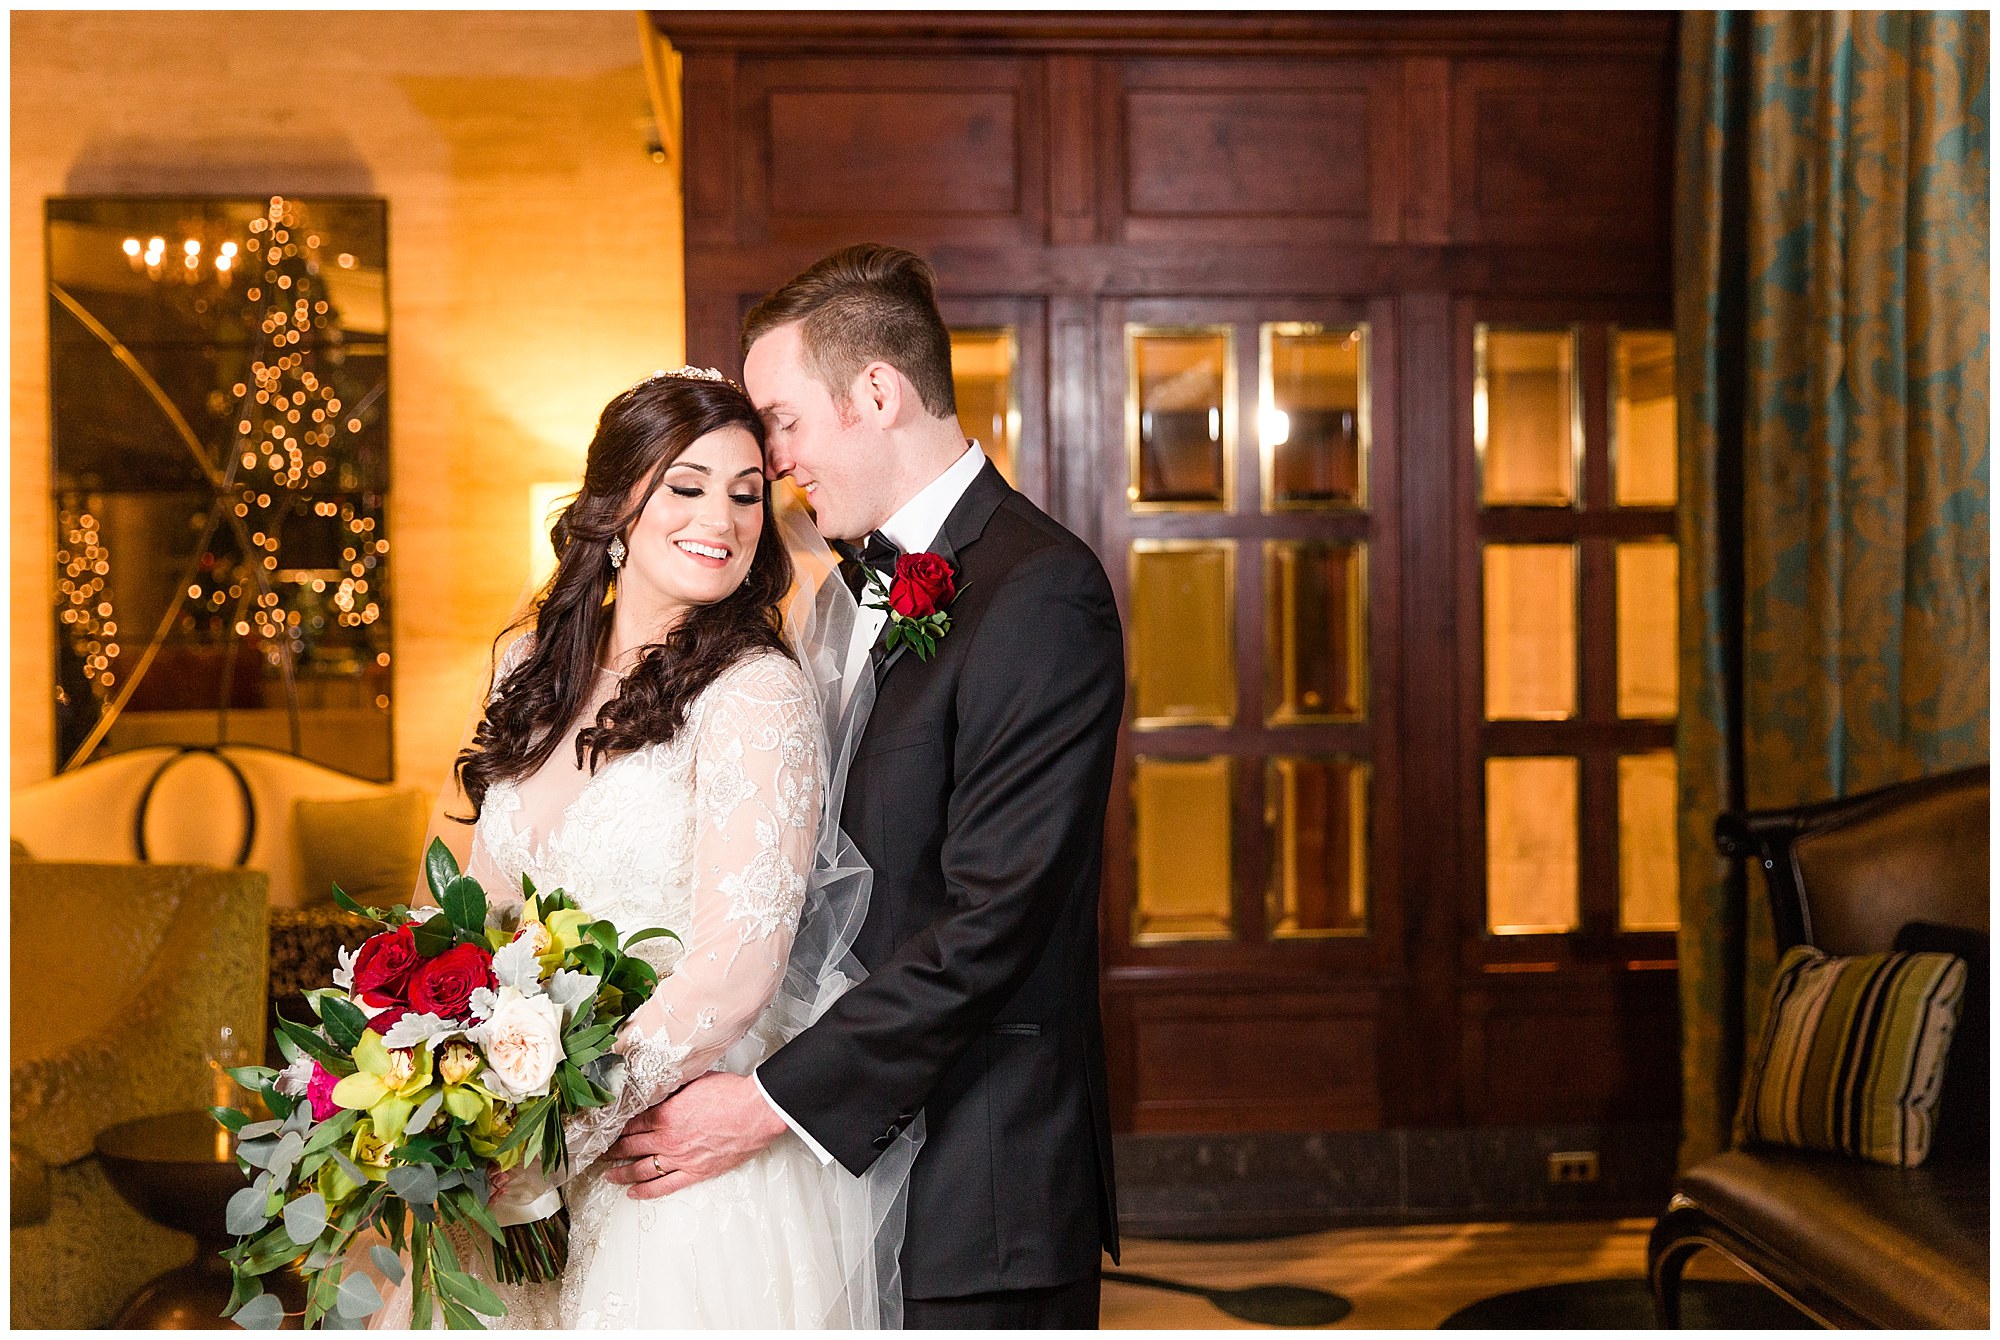 Cooper & Anna's Black Tie And Maroon Wedding at The Hotel DuPont in Wilmington, DE Photos